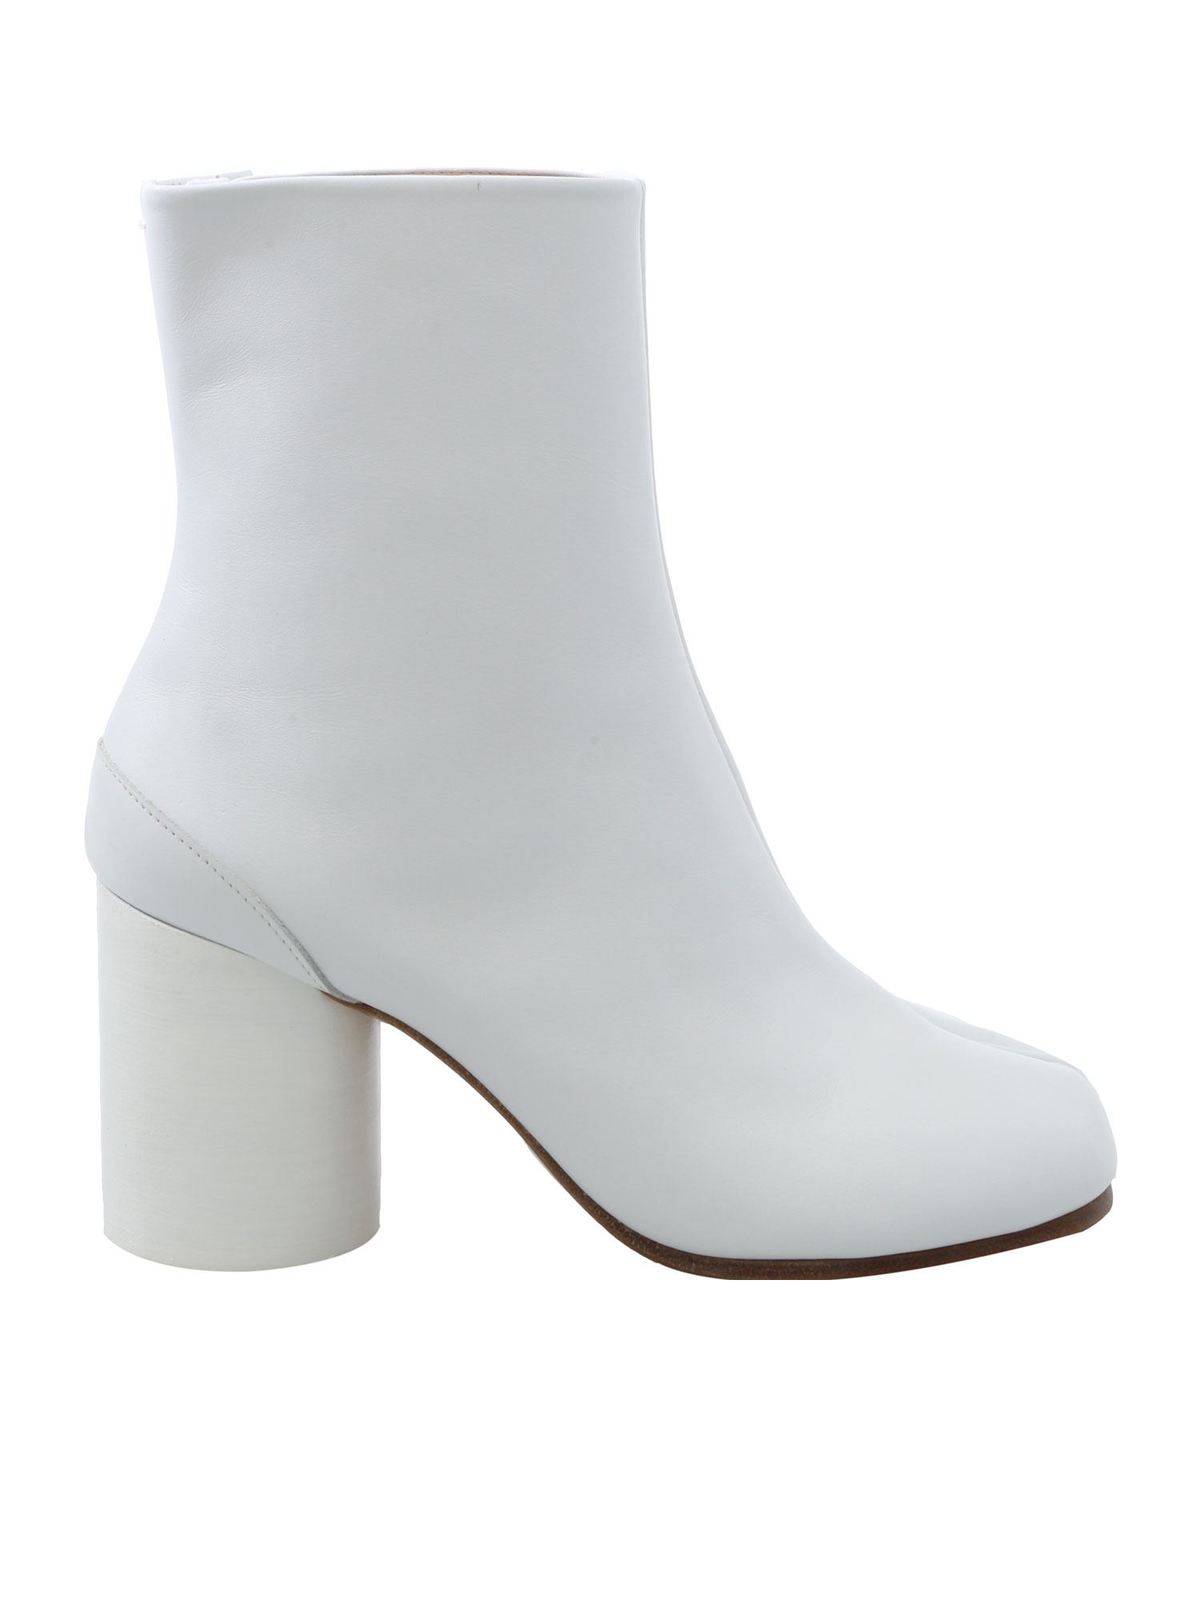 Maison Margiela - White Tabi ankle boots - ankle boots ...